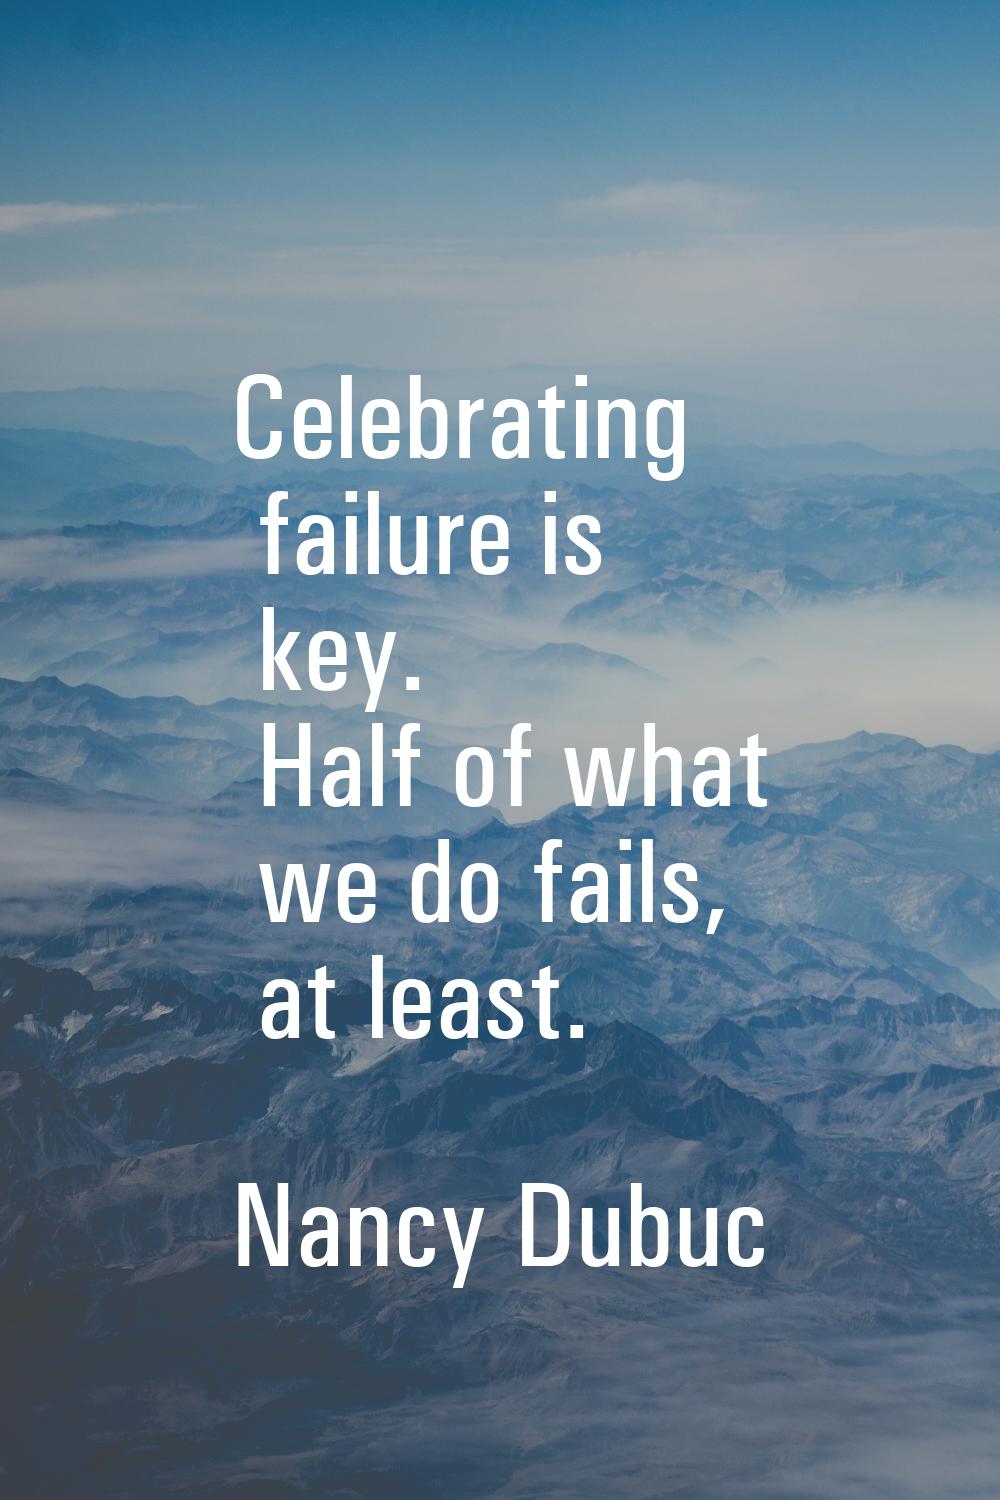 Celebrating failure is key. Half of what we do fails, at least.